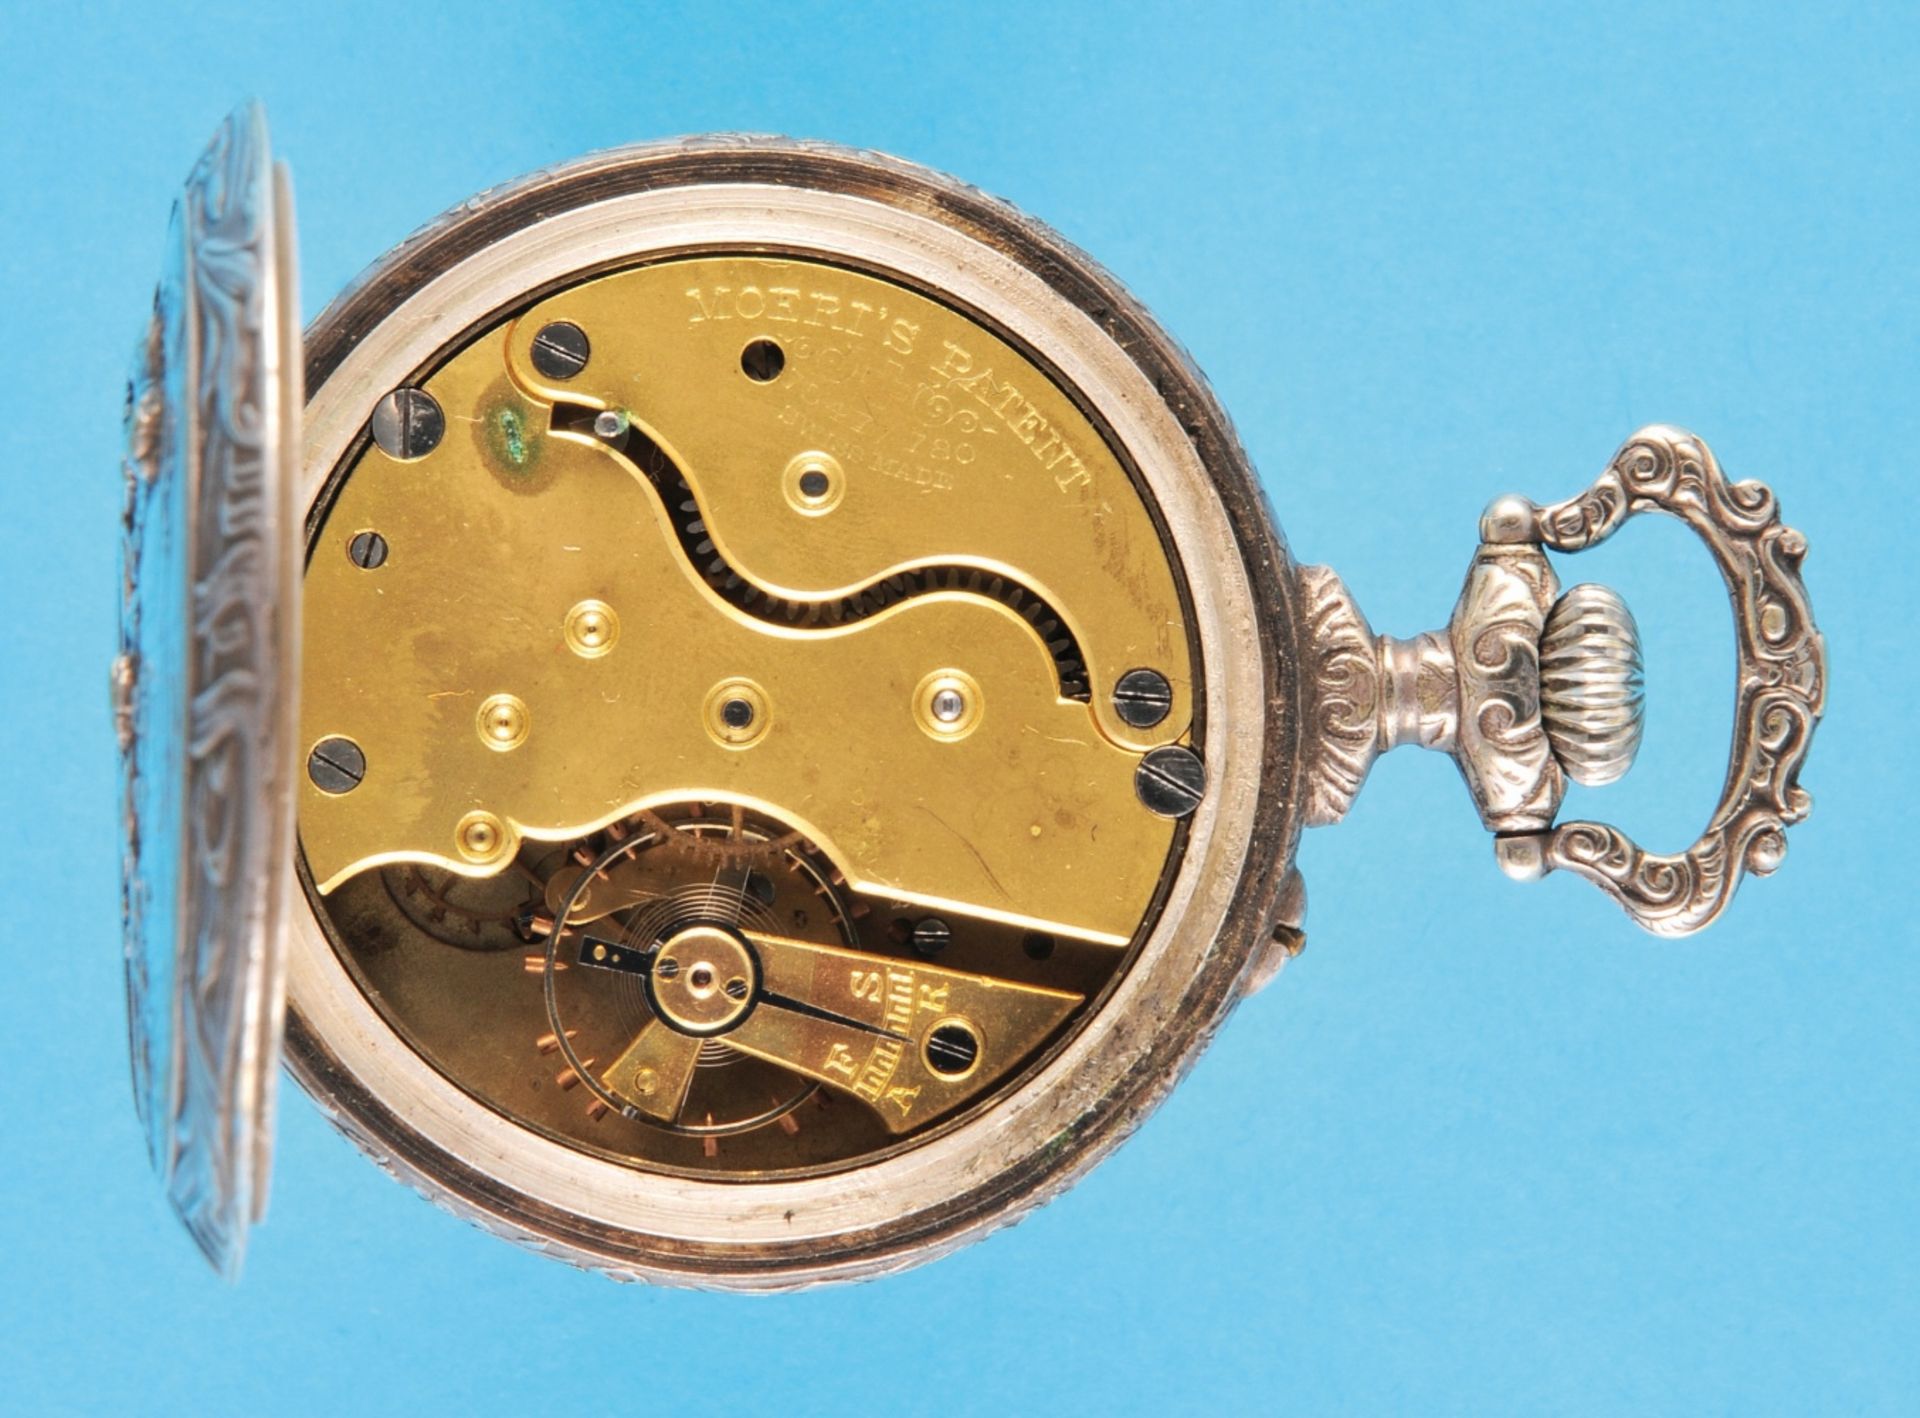 Moeris Patent, motif pocket watch with billiard players, silver-plated case, all sides in relief,